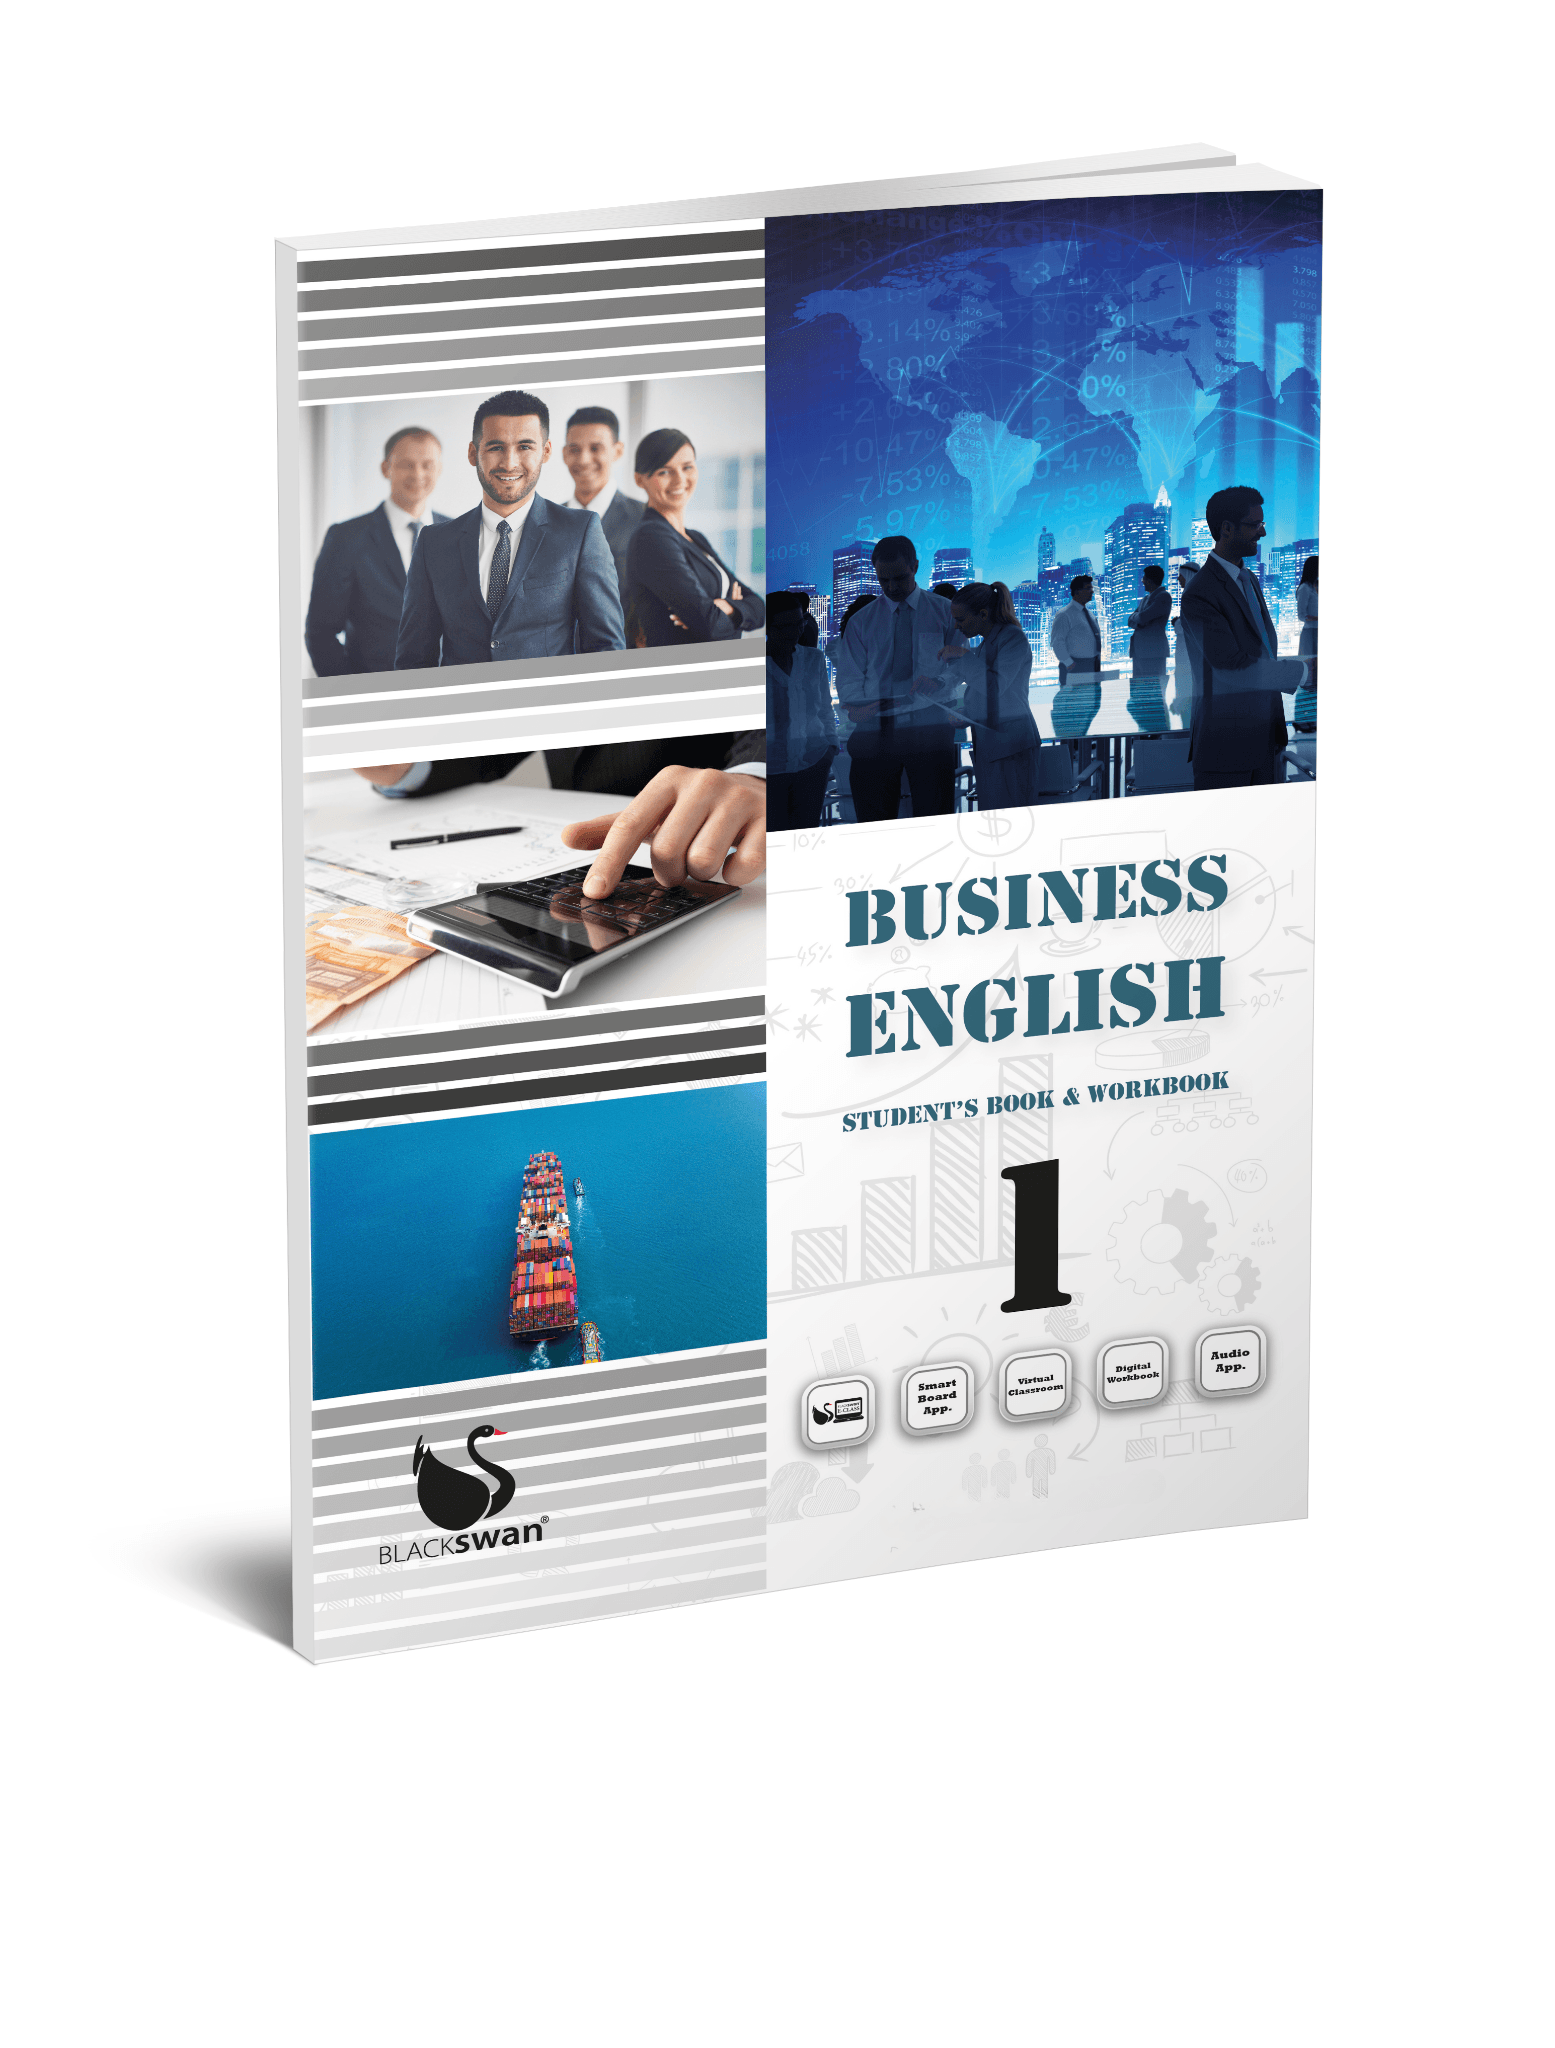 Business English 1 Student's Book & Workbook